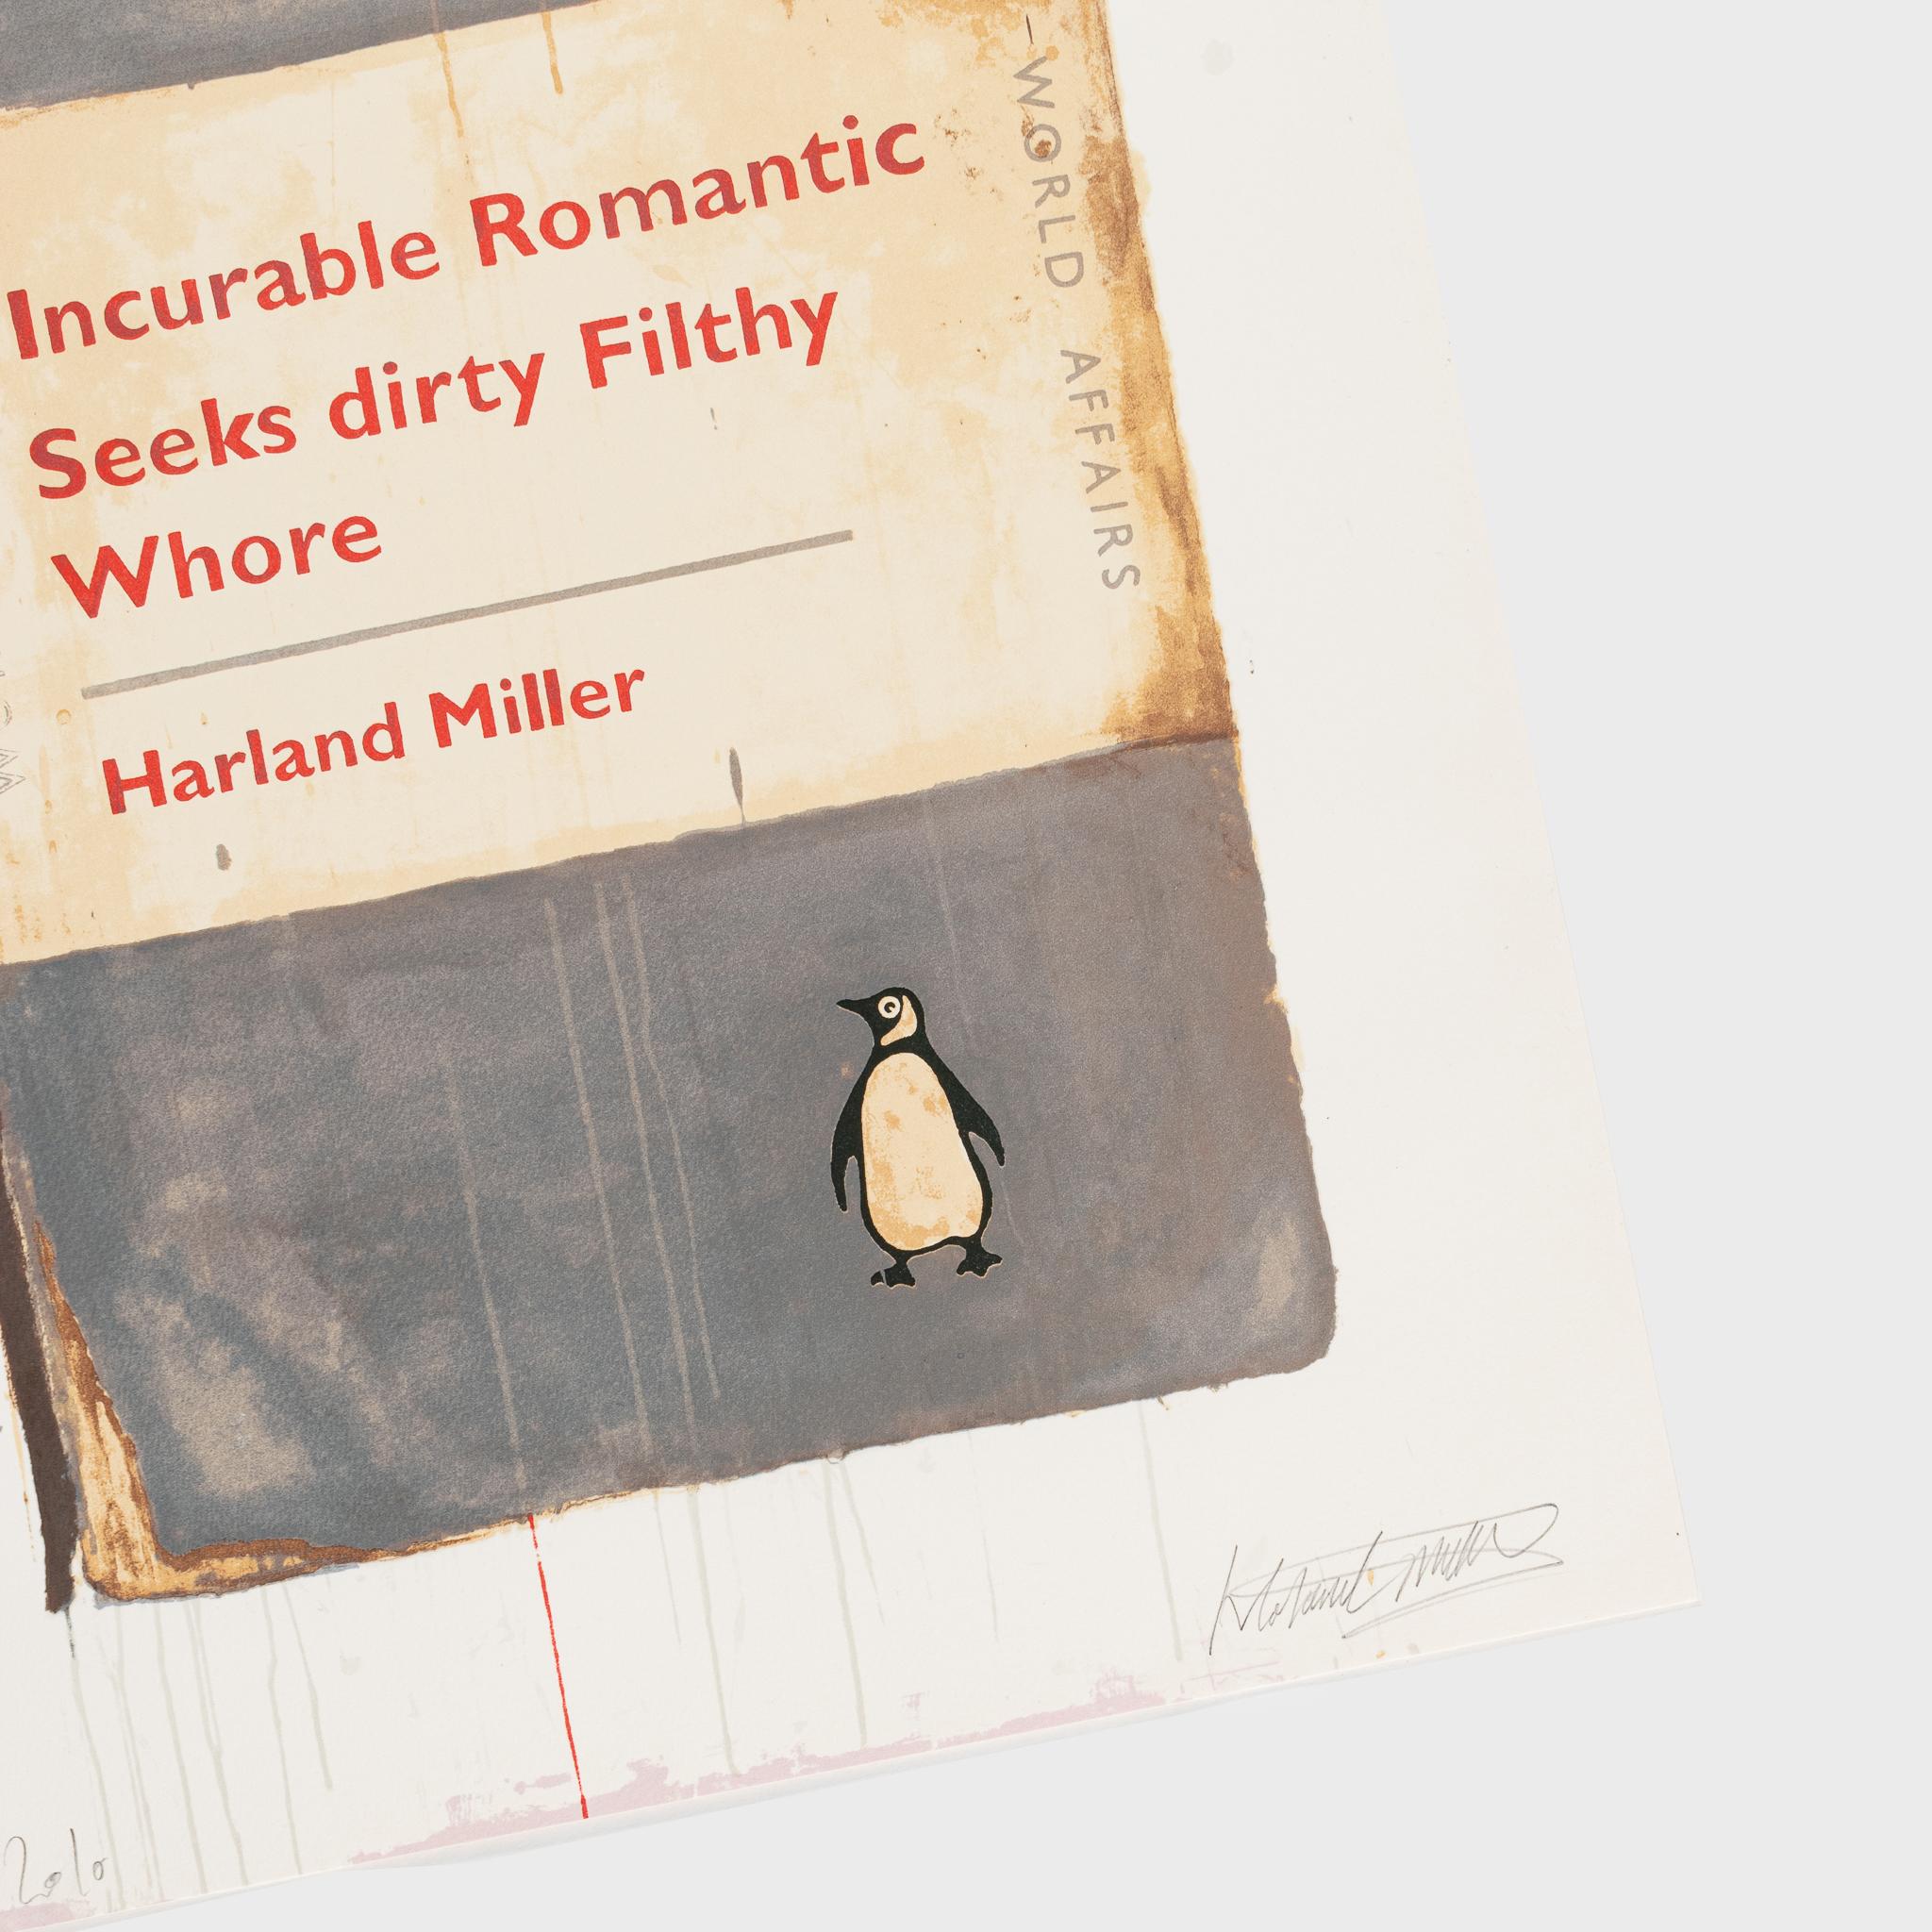 Incurable Romantic Seeks Dirty Filthy Whore - Print by Harland Miller